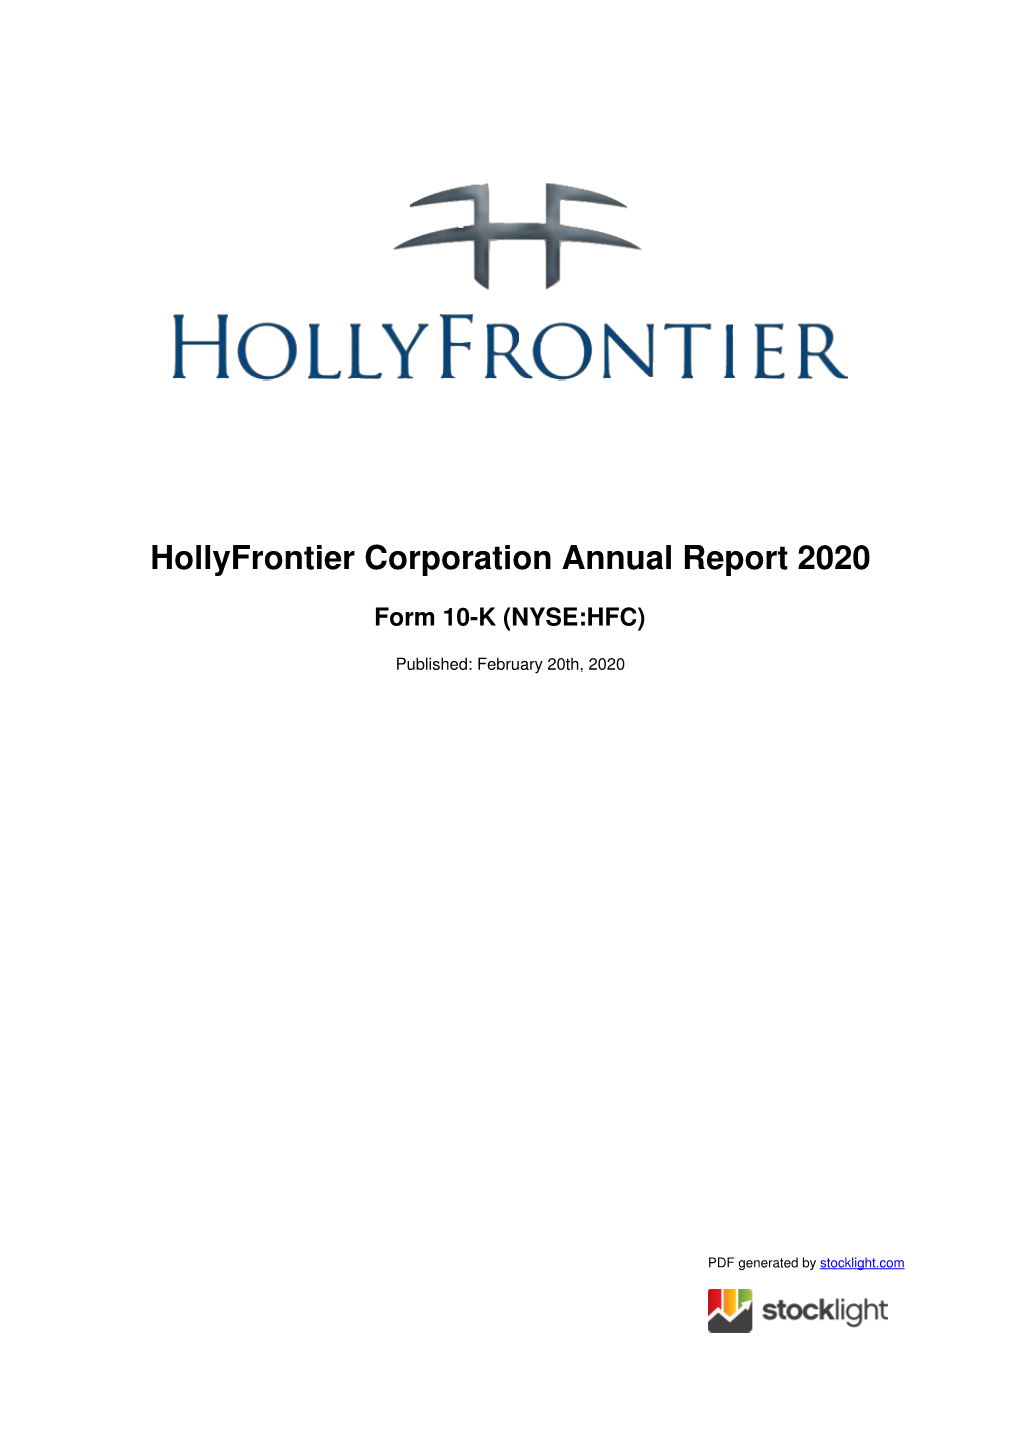 Hollyfrontier Corporation Annual Report 2020